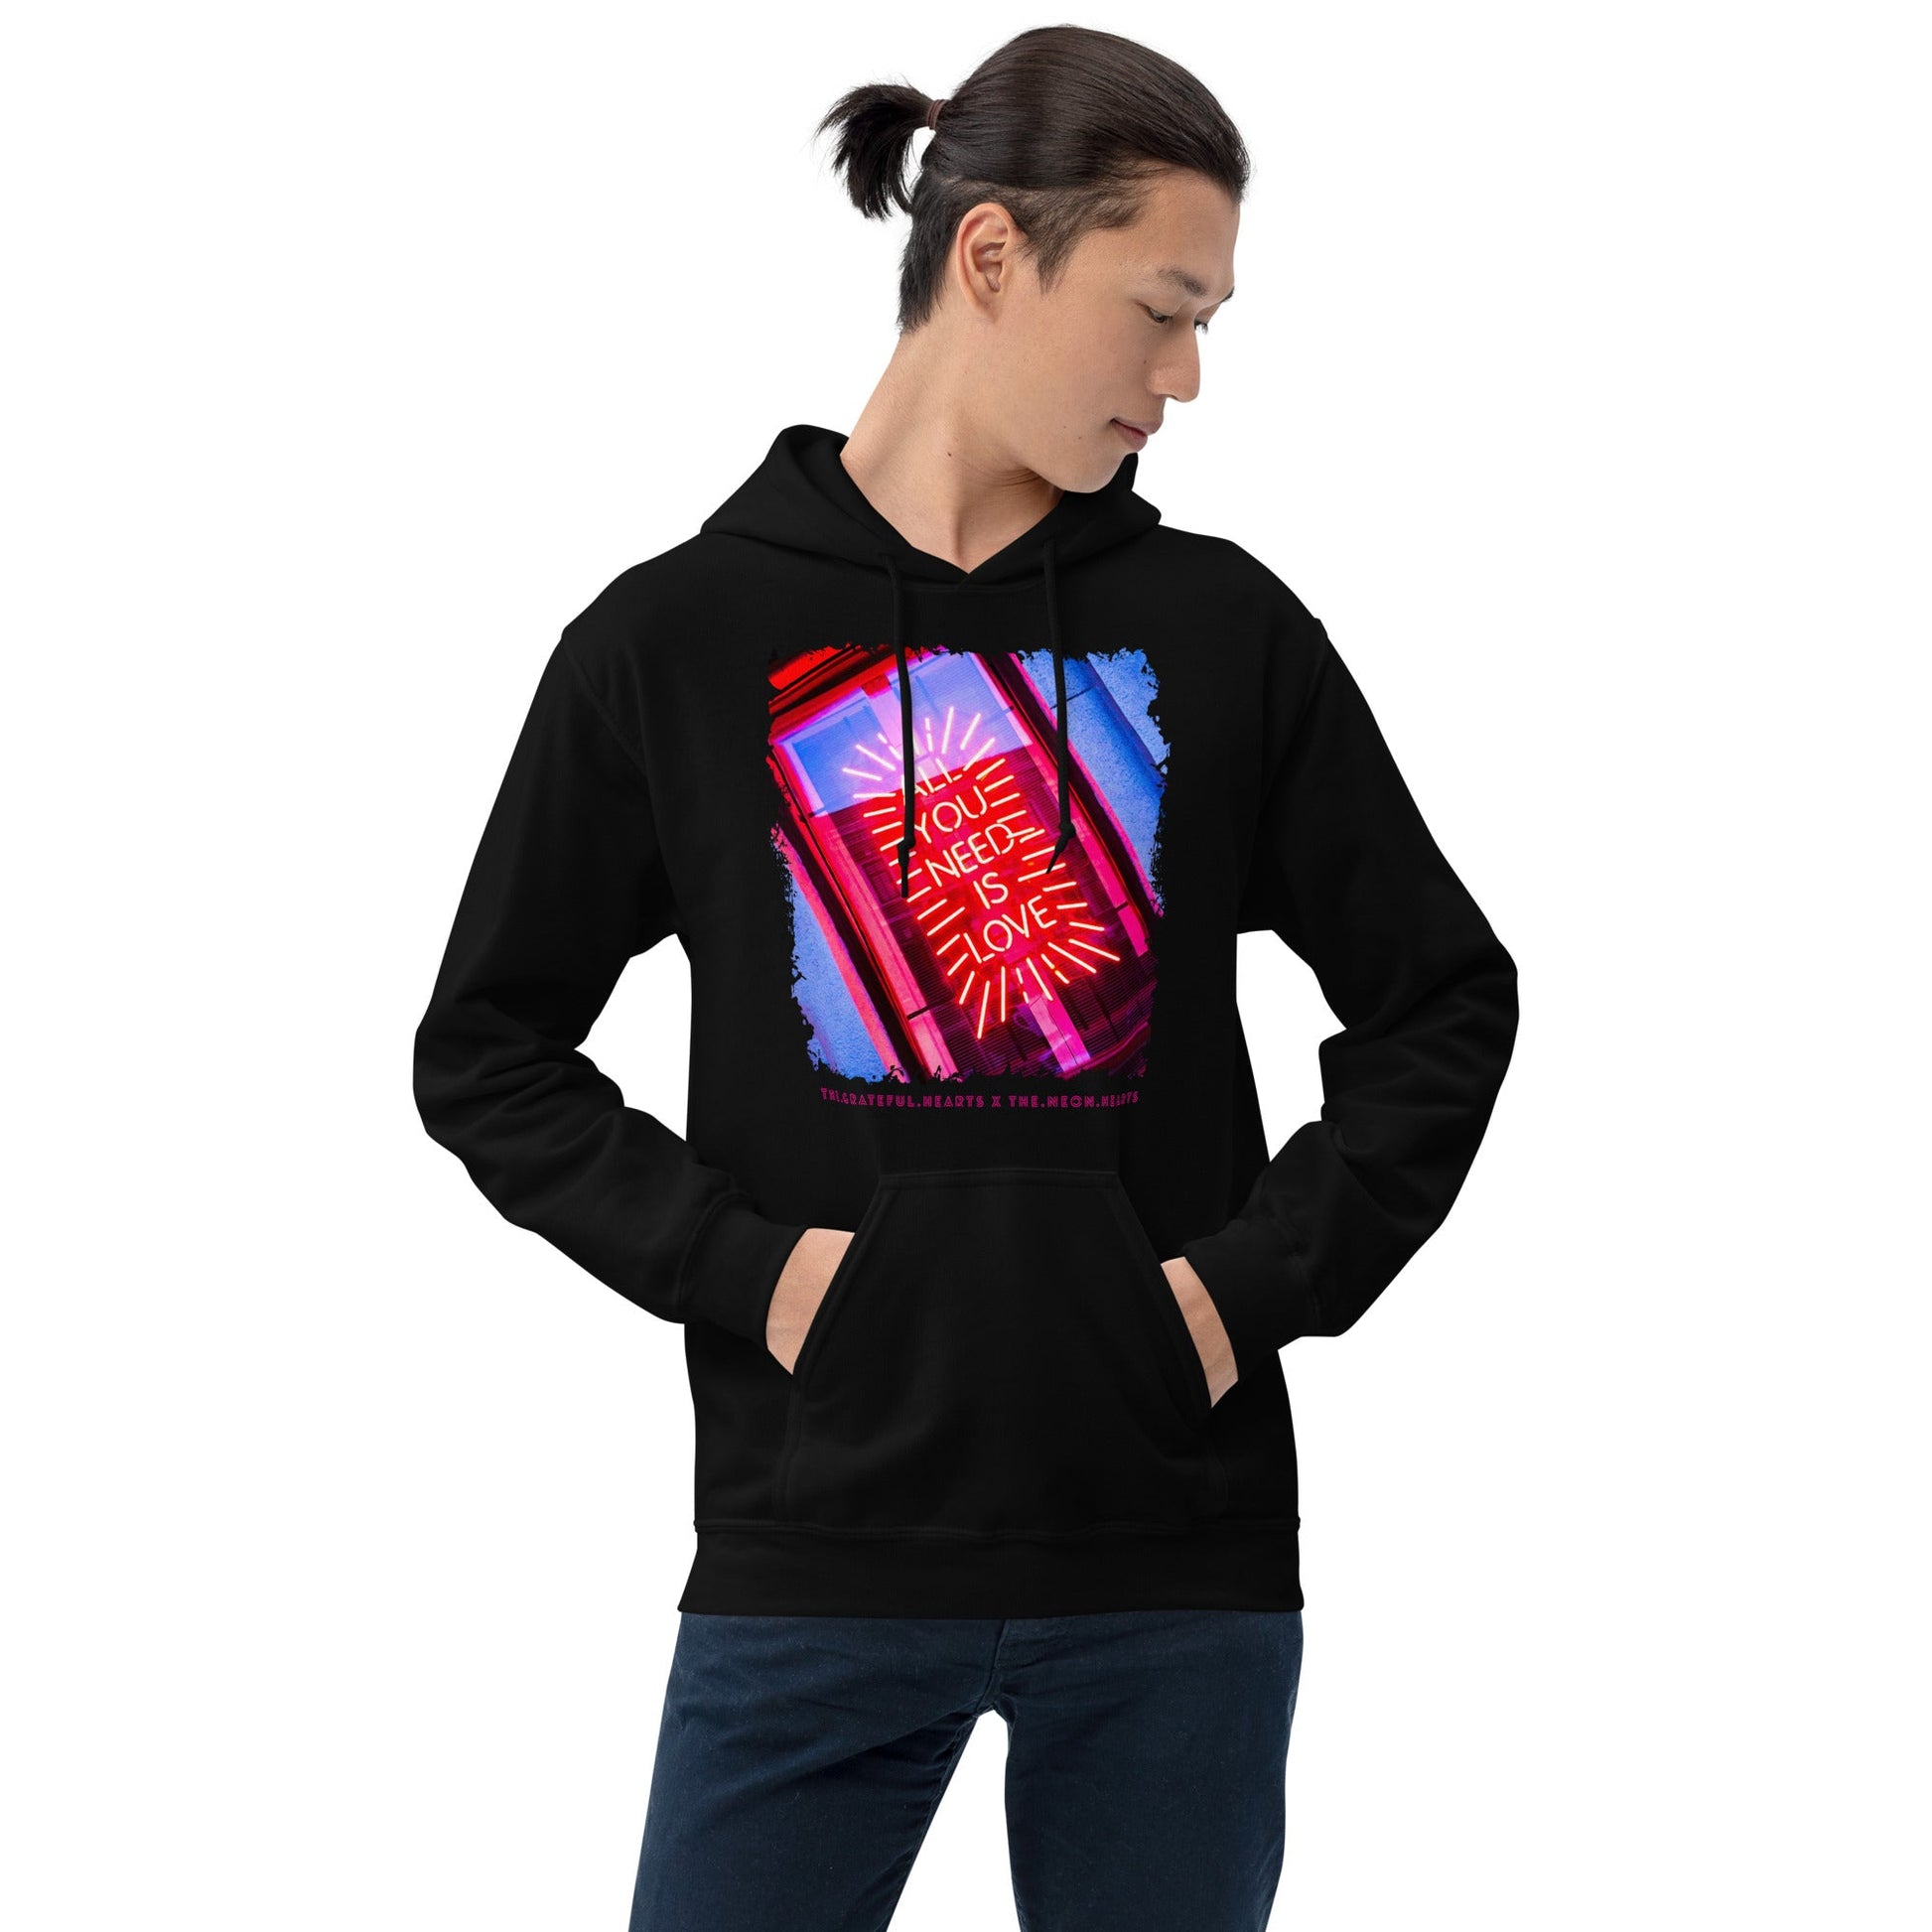 All you need is Love ❤️ - Unisex Heavy Blend Hoodie (Available in Various Colors 💖💙💜) - The Grateful Hearts